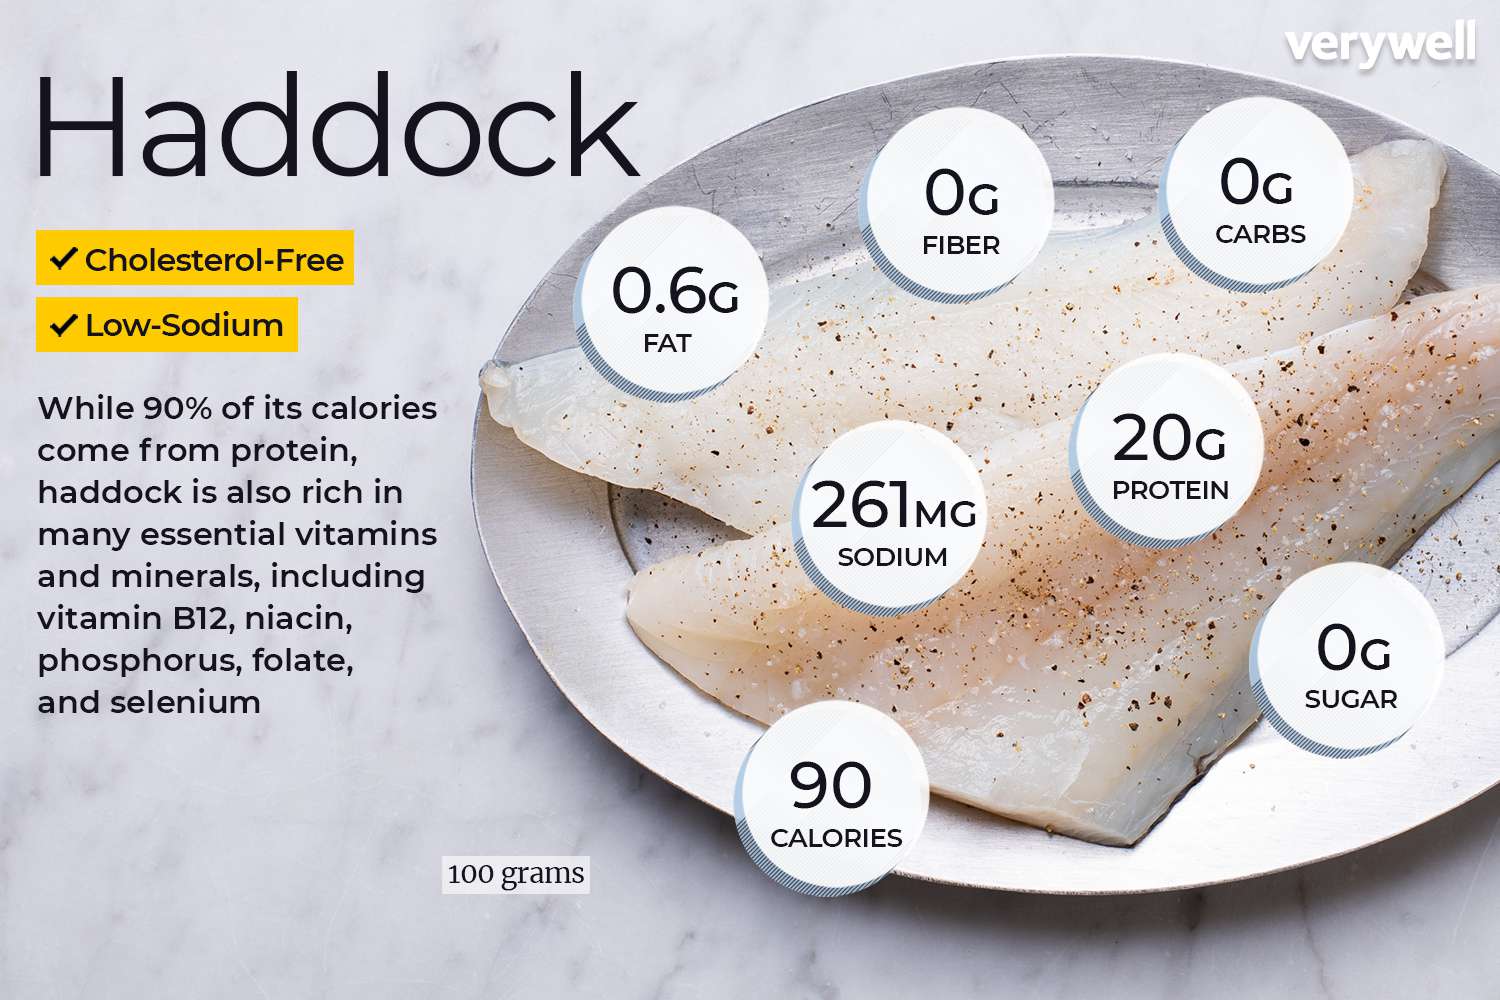 Haddock nutrition facts